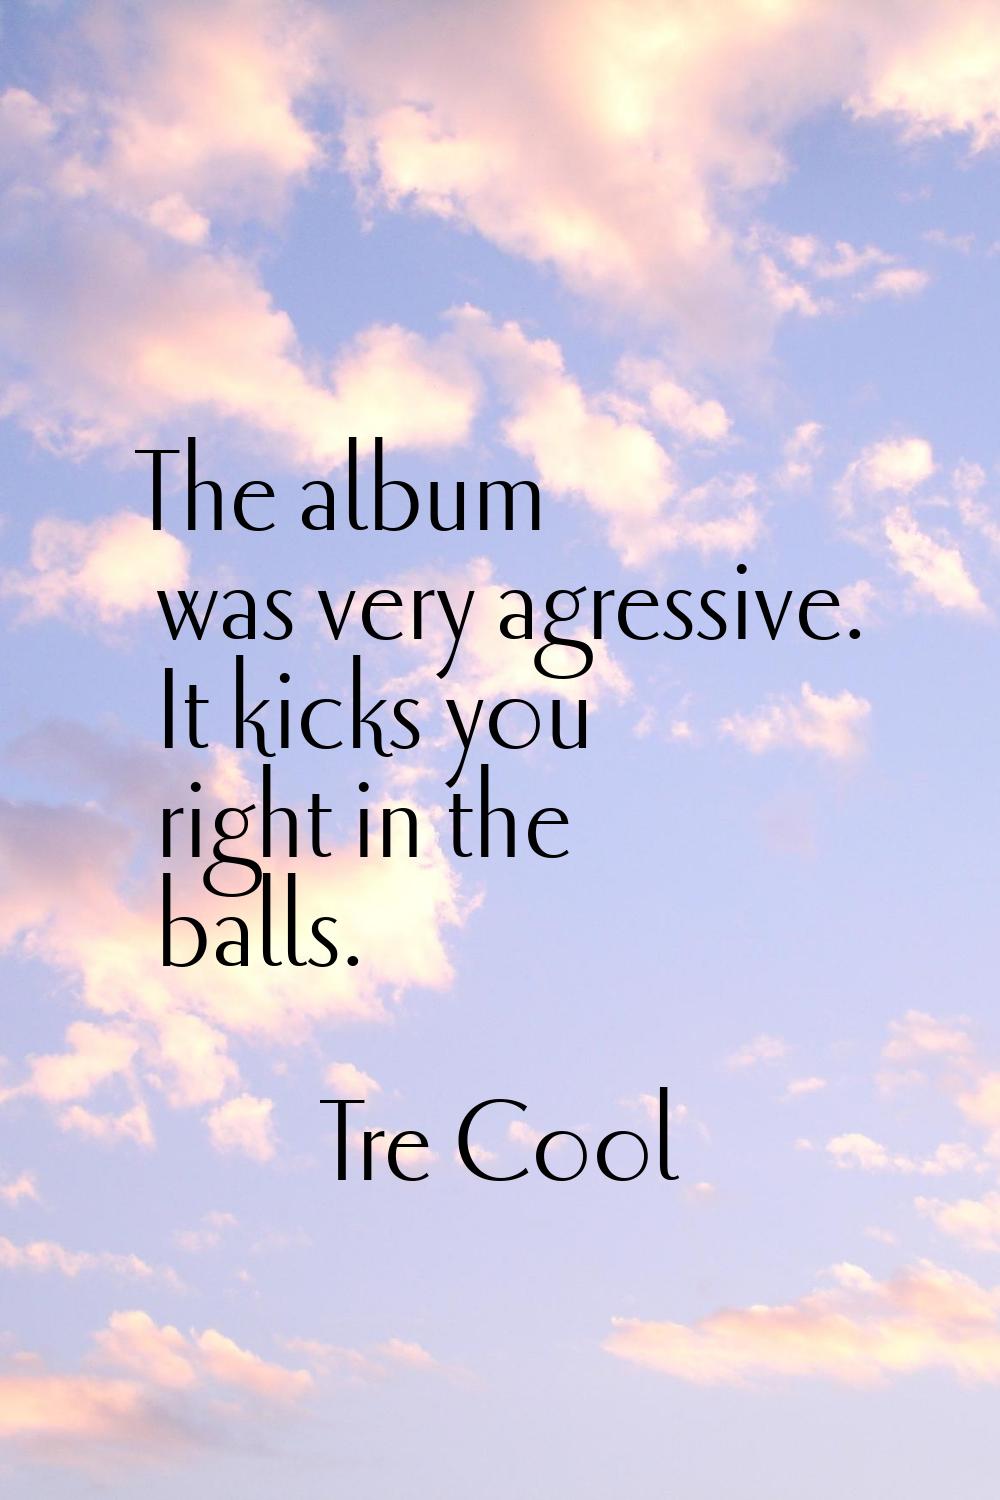 The album was very agressive. It kicks you right in the balls.